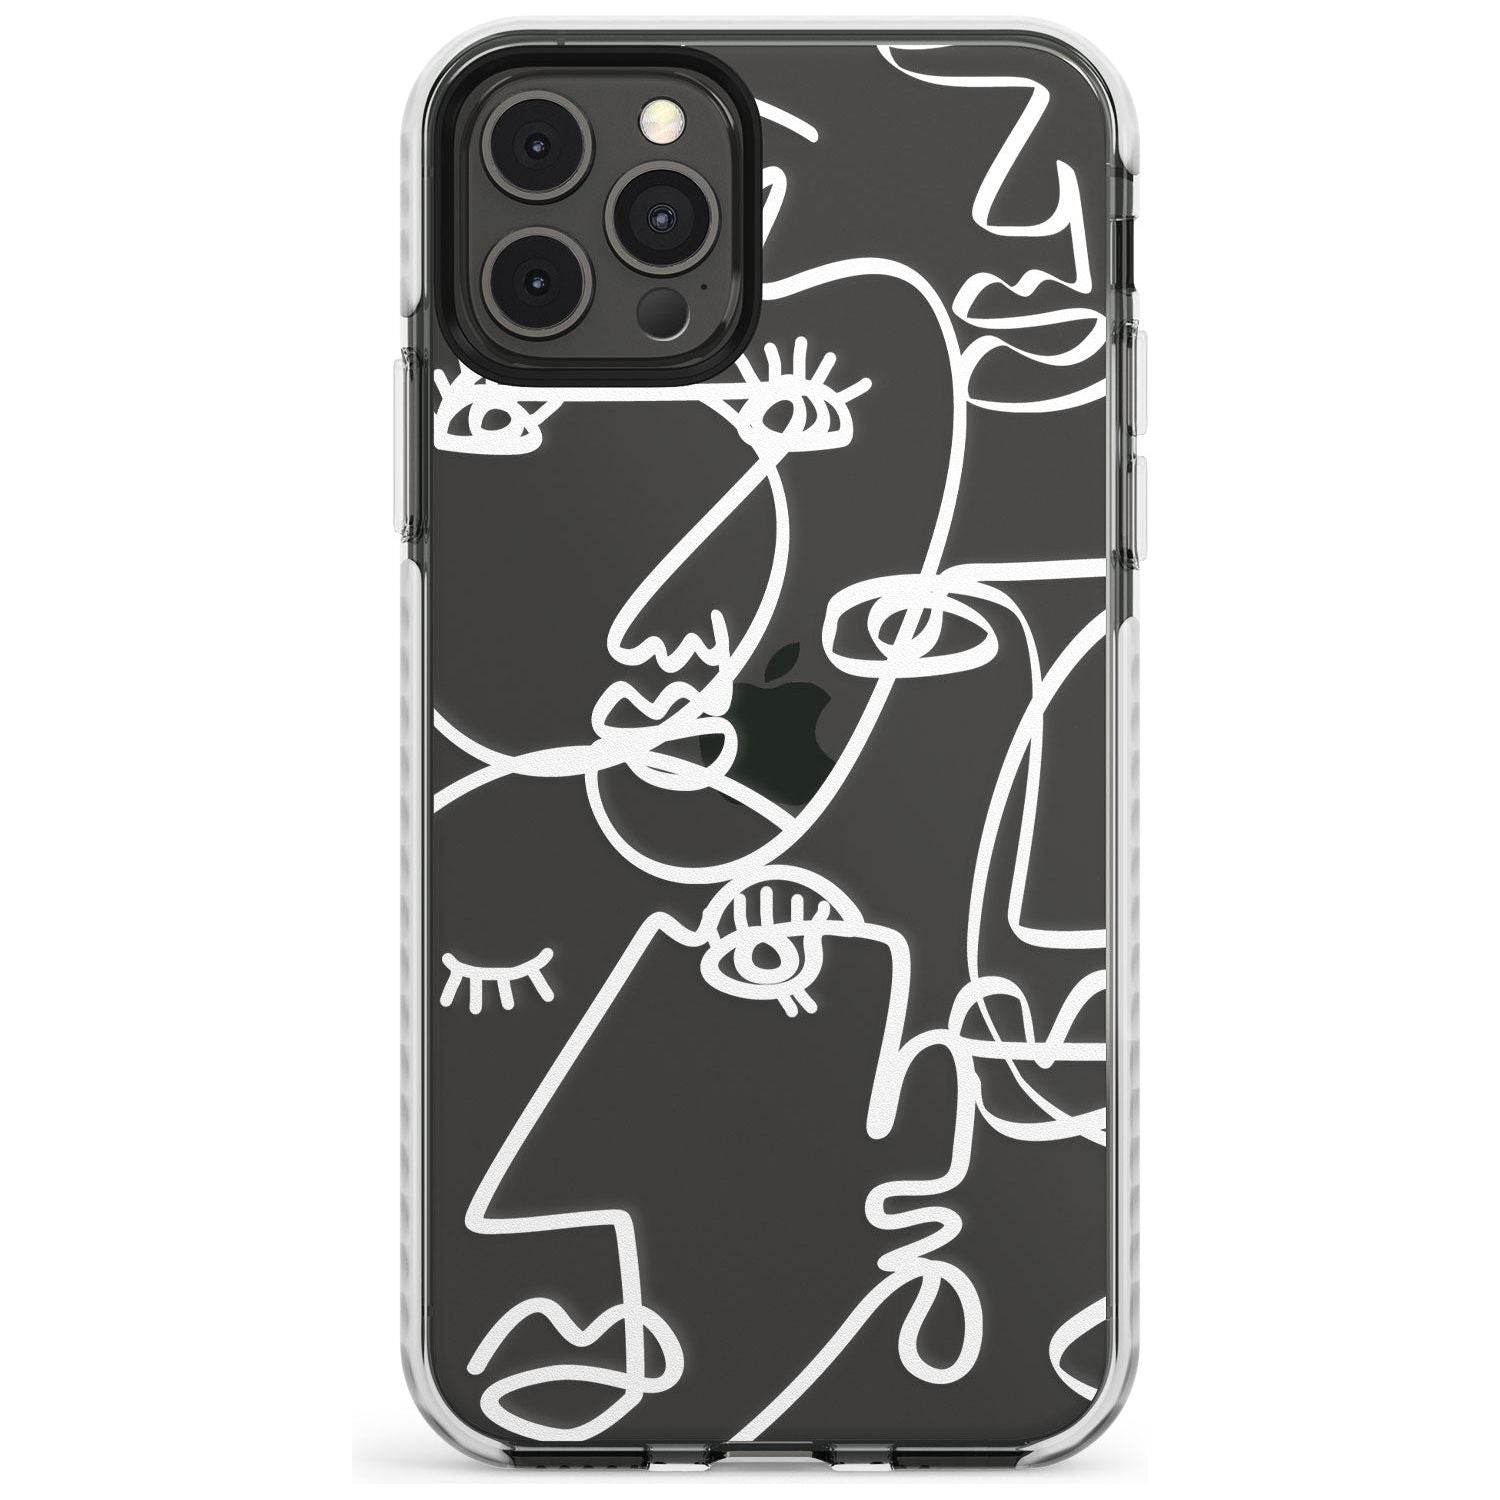 Continuous Line Faces: White on Clear Slim TPU Phone Case for iPhone 11 Pro Max